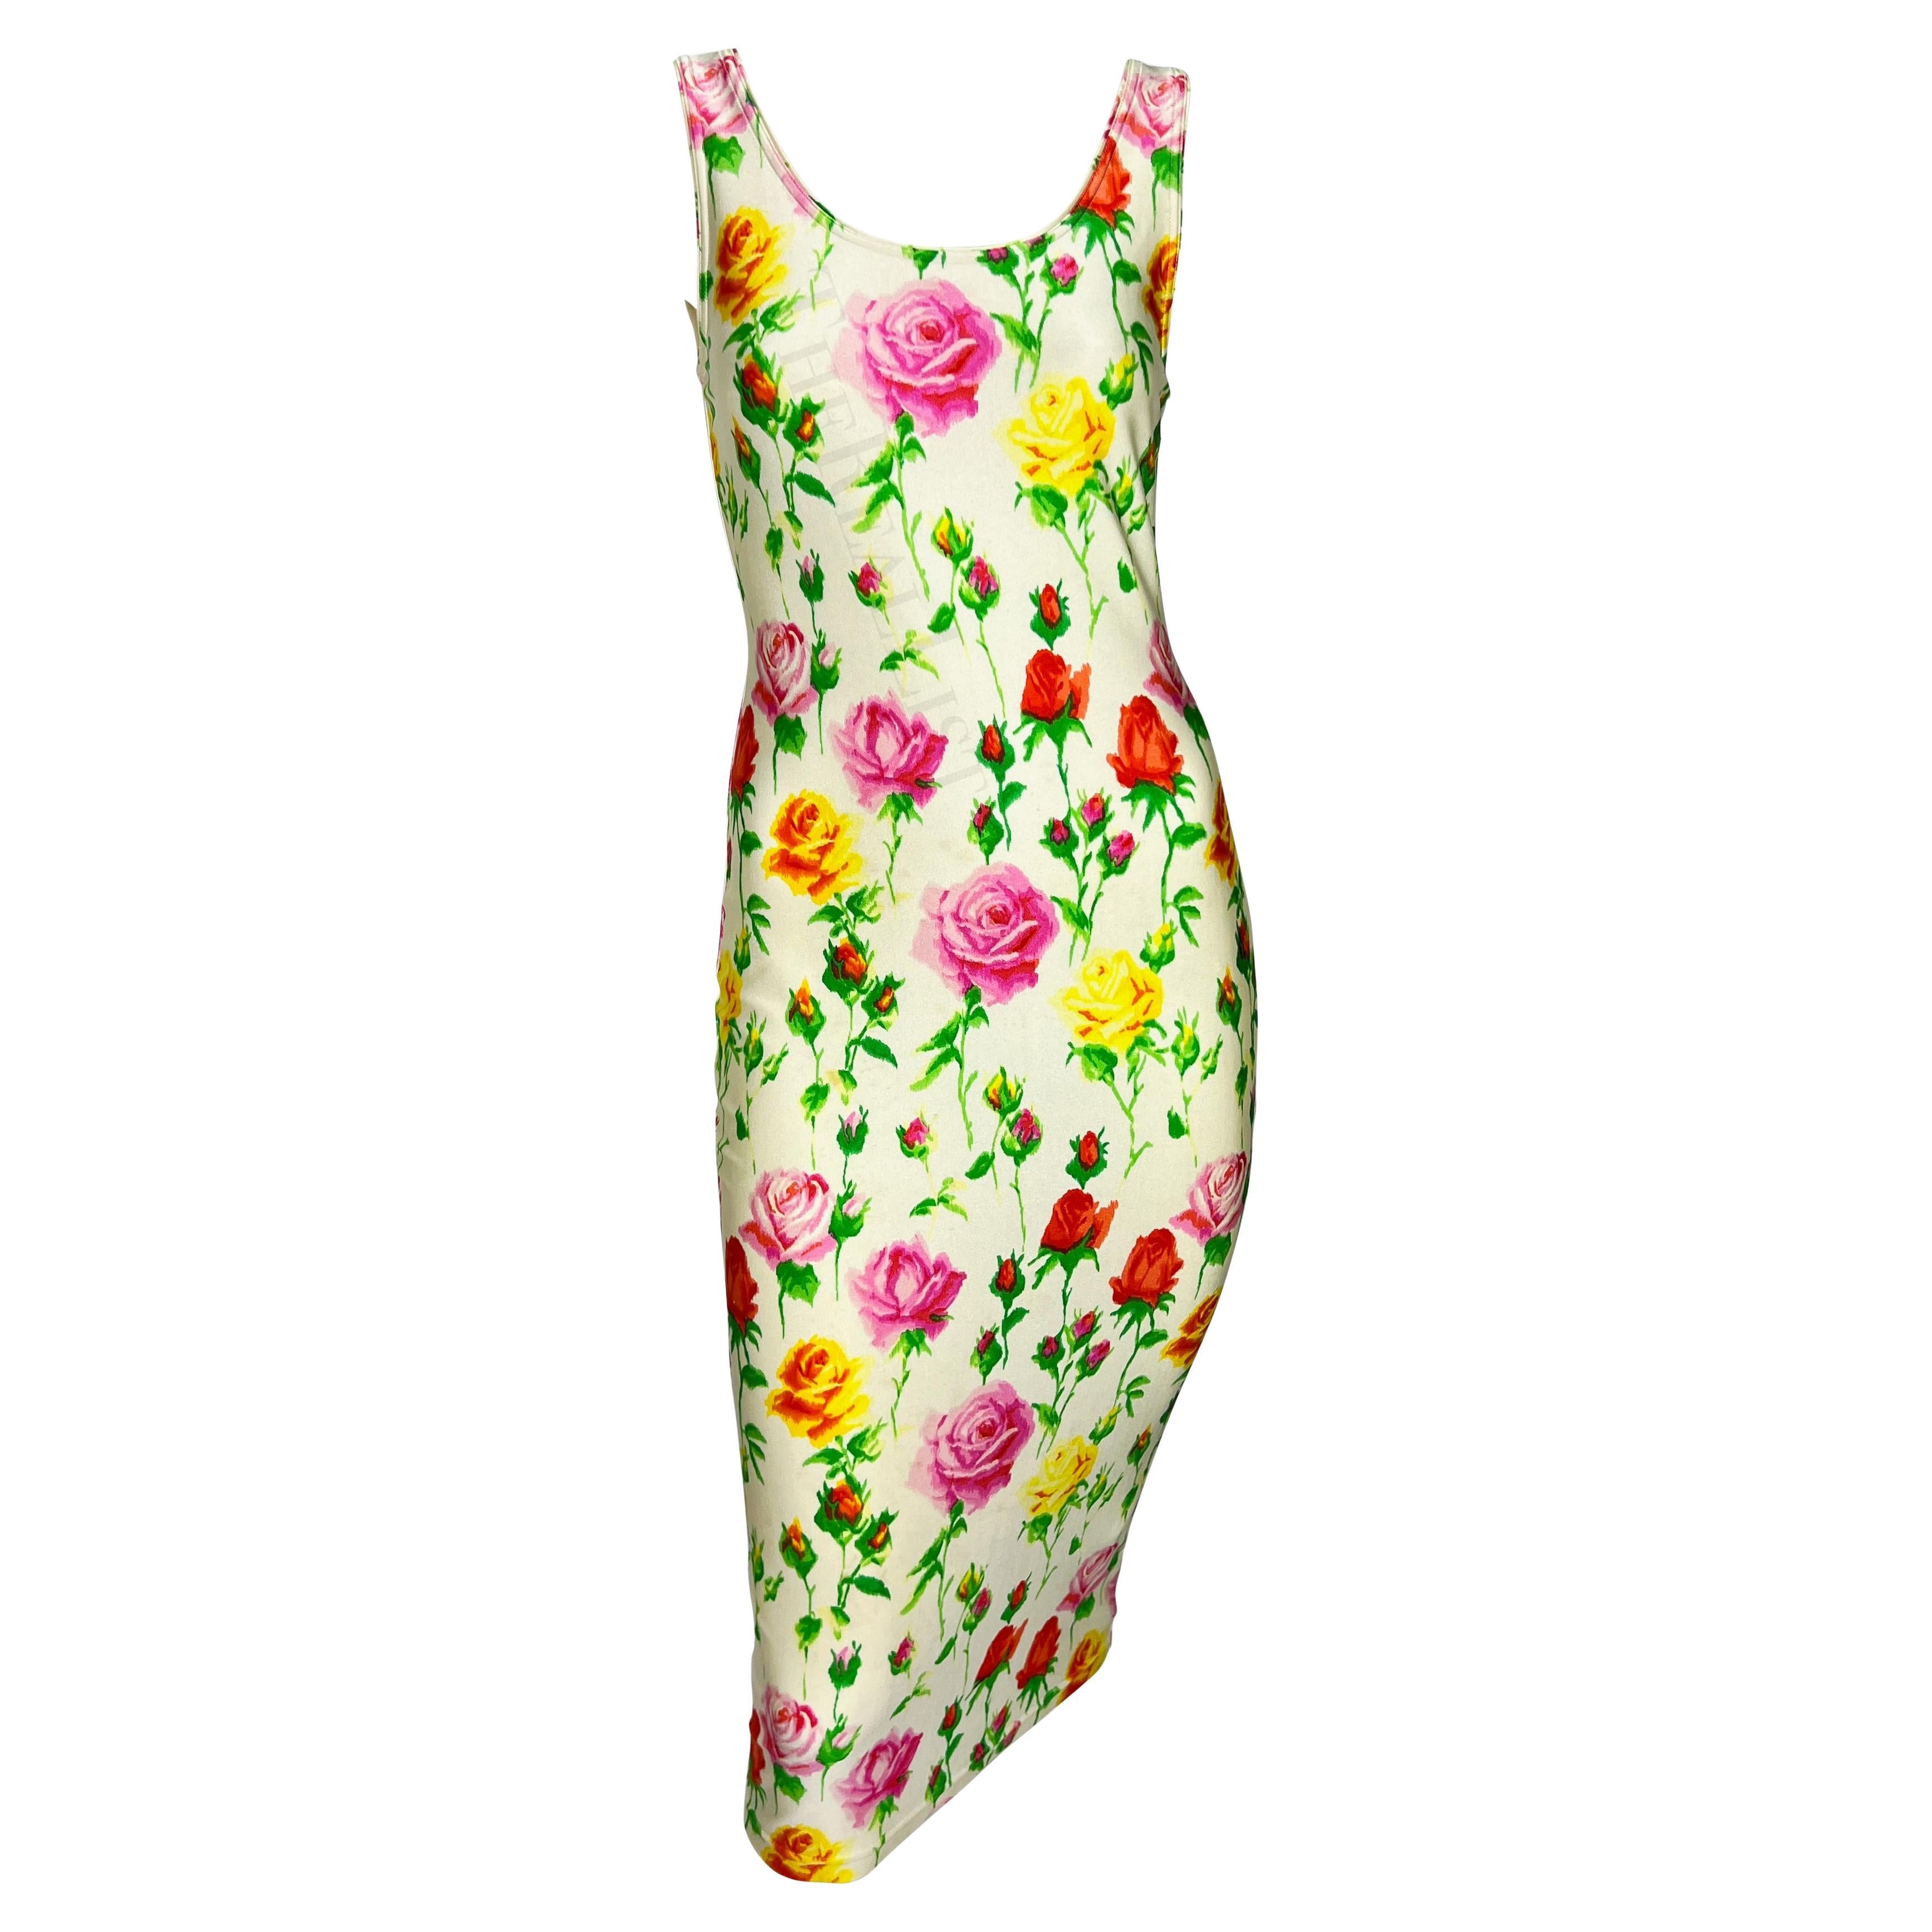 S/S 1995 Gianni Versace Runway White Floral Rose Bodycon Dress For Sale